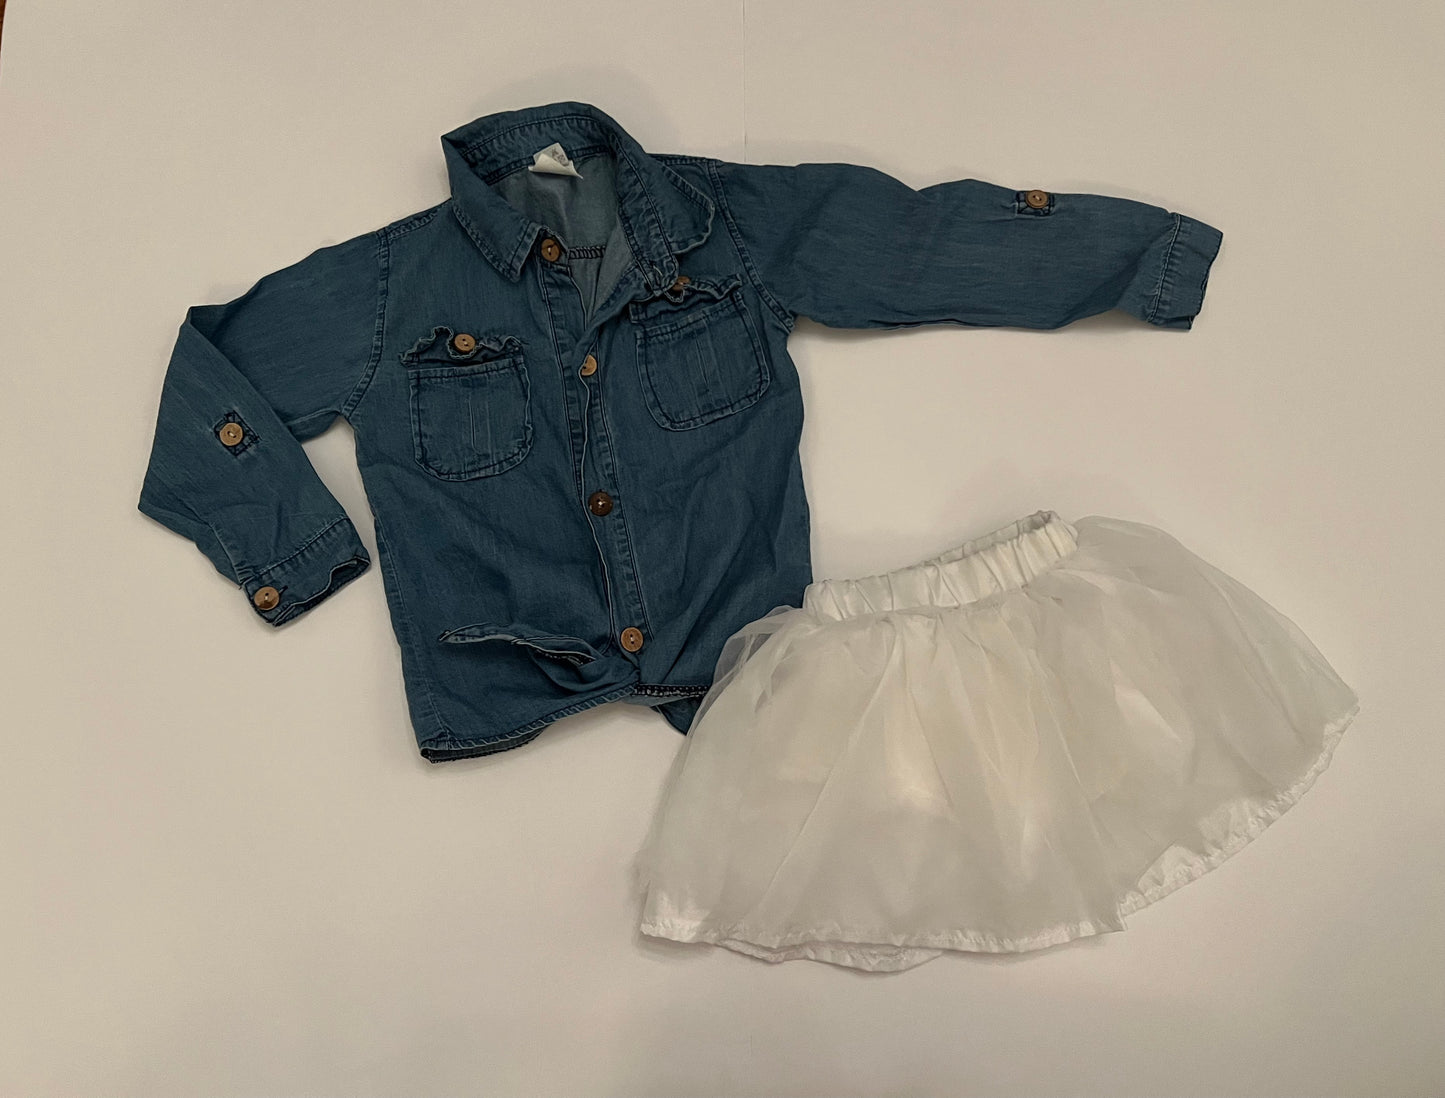 Girls Size 2T Jean Shirt and White Tulle Skirt